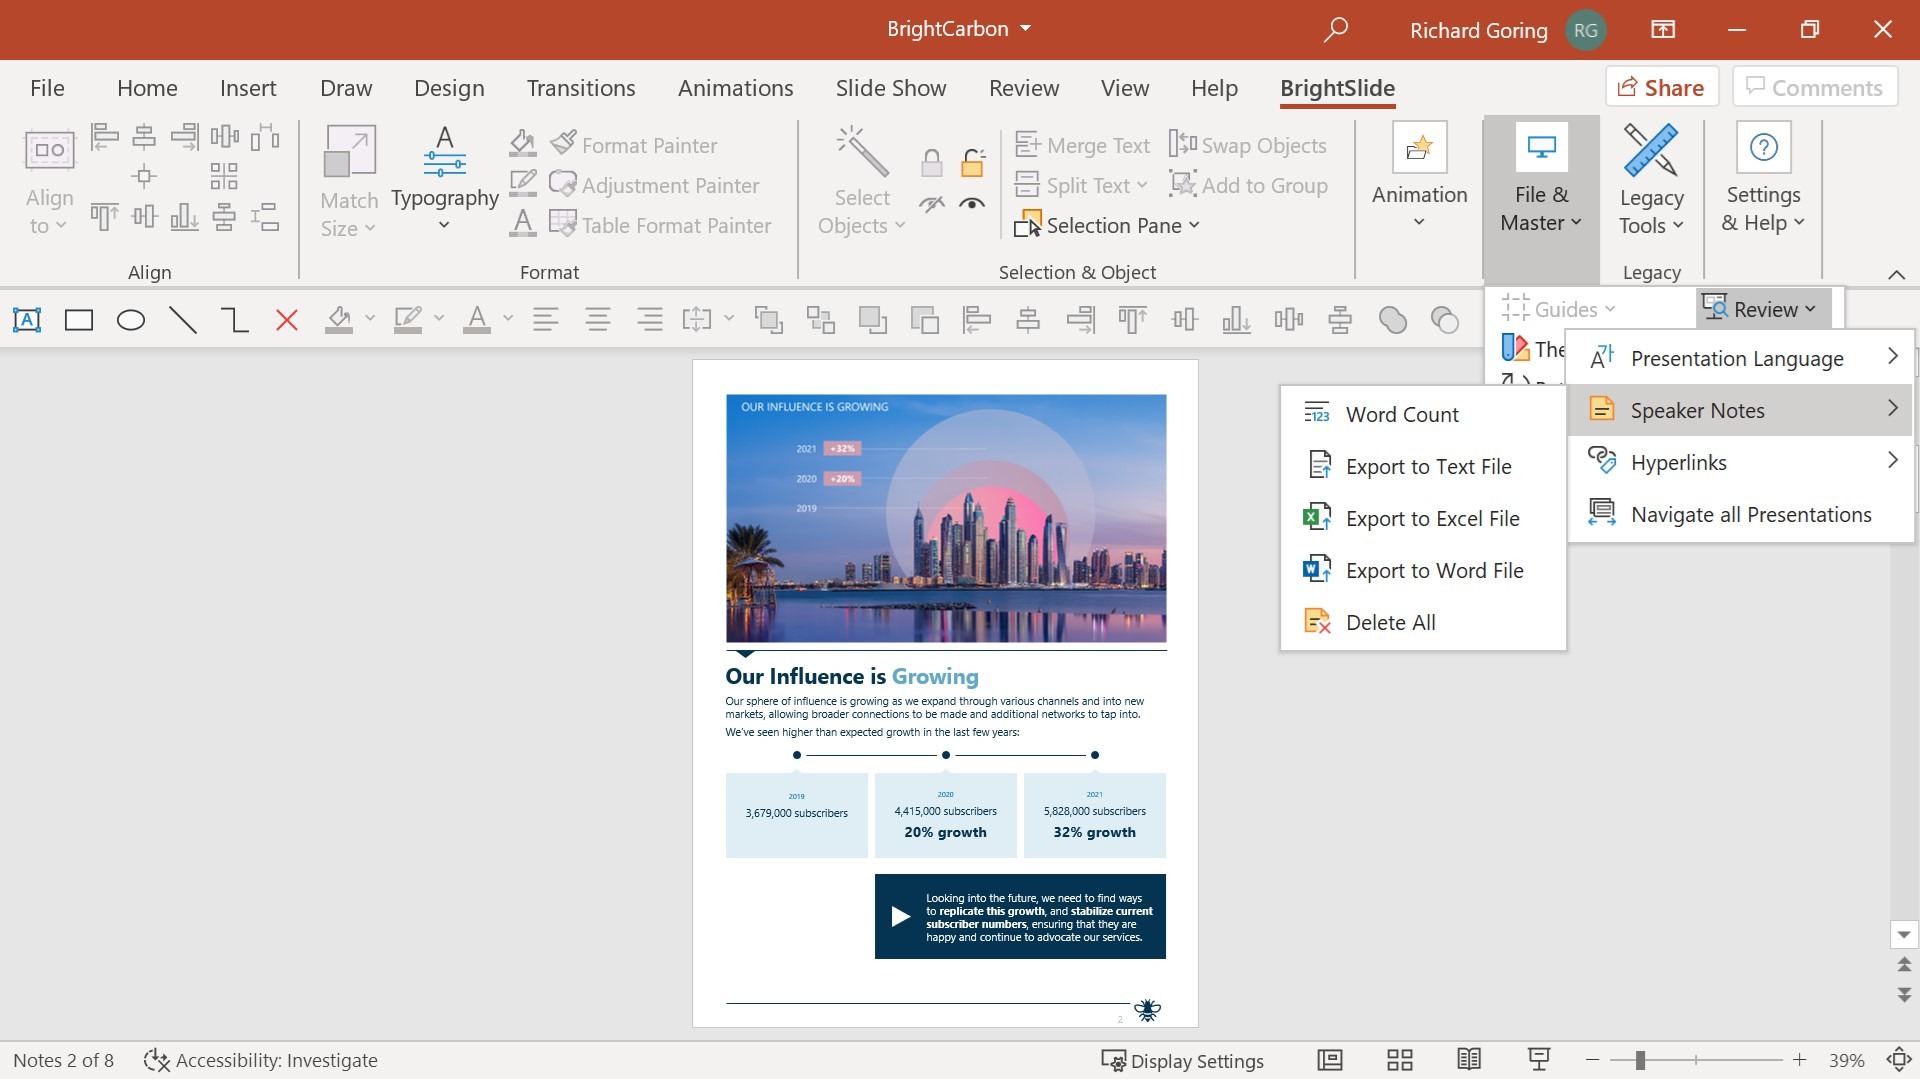 Screenshot of PowerPoint Notes Pages view. The BrightSlide tab is open and the File & Master options open. under 'Review' 'Speaker Notes' is selected. A drop down menu of the Export Speaker Notes options is viewable. The options are: Export to Text Files, Export to Excel File, Export to Word File and Delete All. 